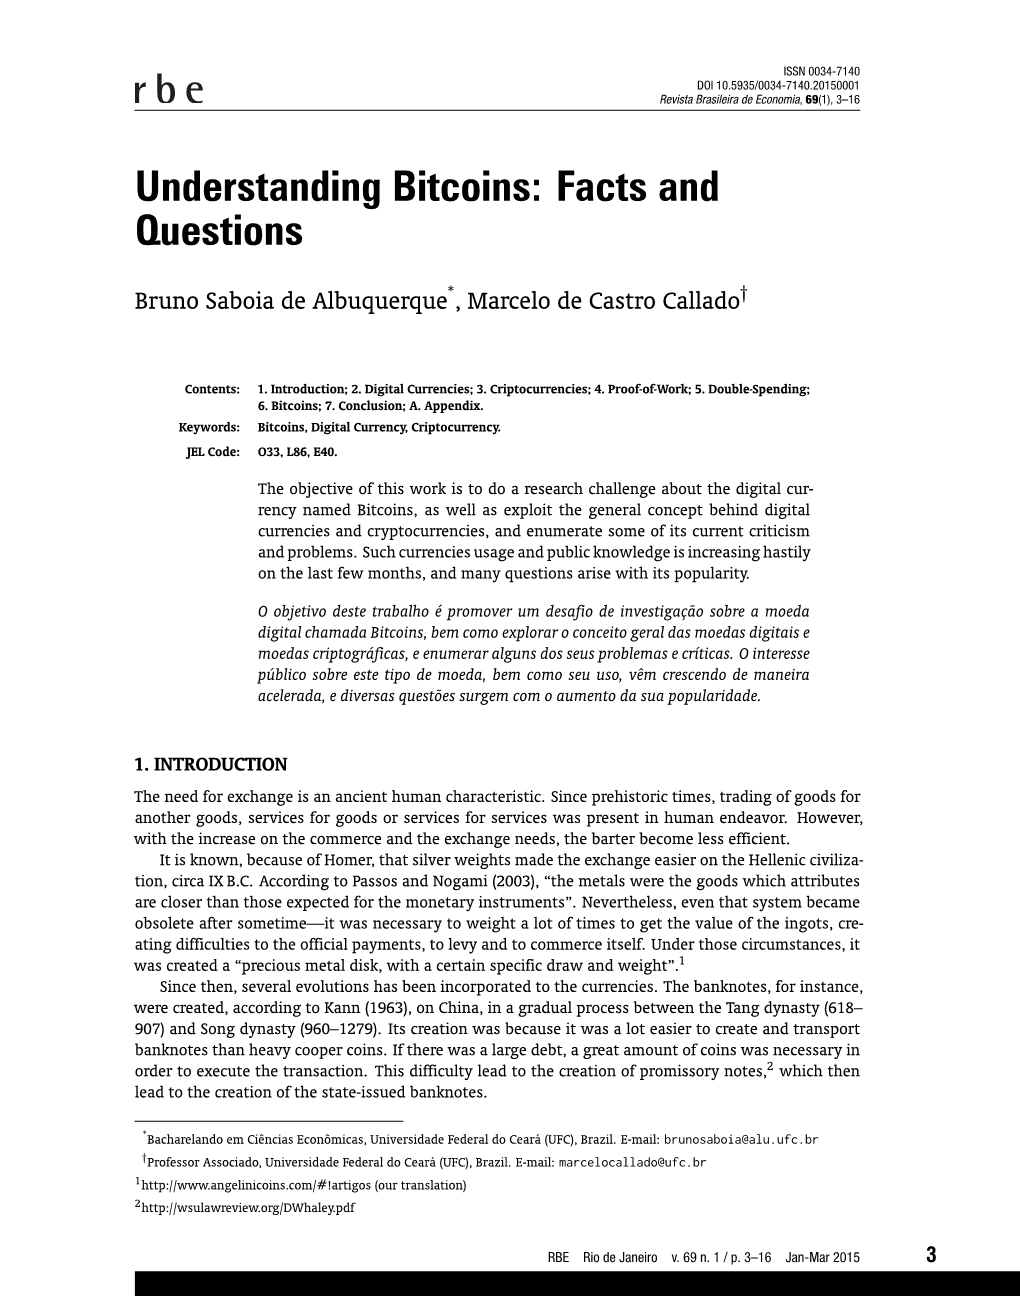 Understanding Bitcoins: Facts and Questions